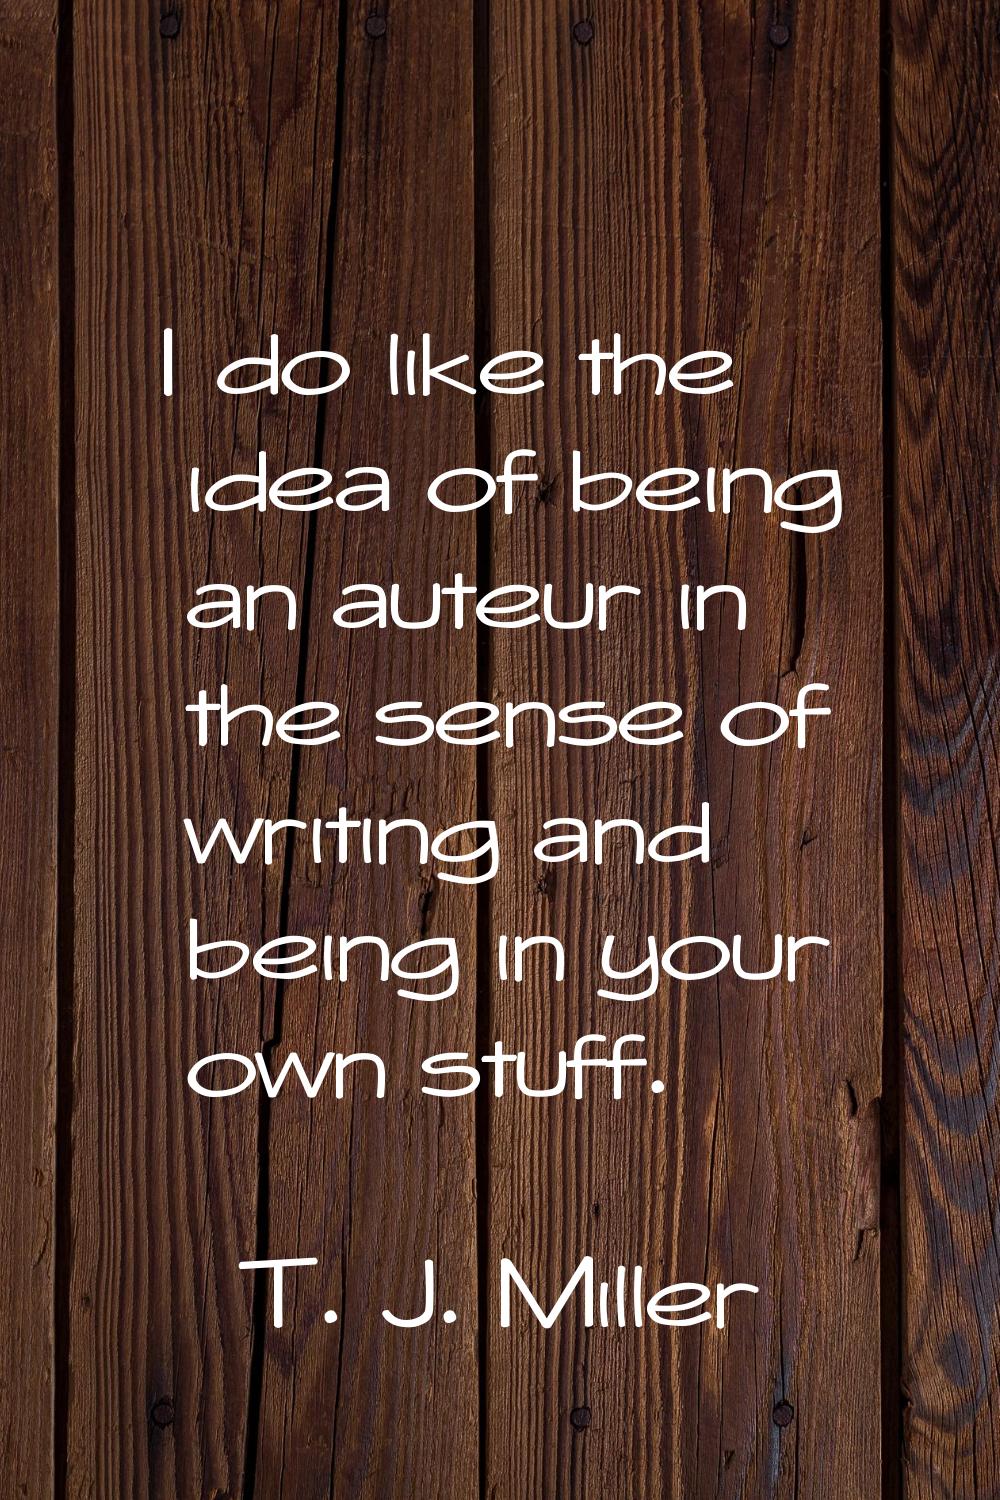 I do like the idea of being an auteur in the sense of writing and being in your own stuff.